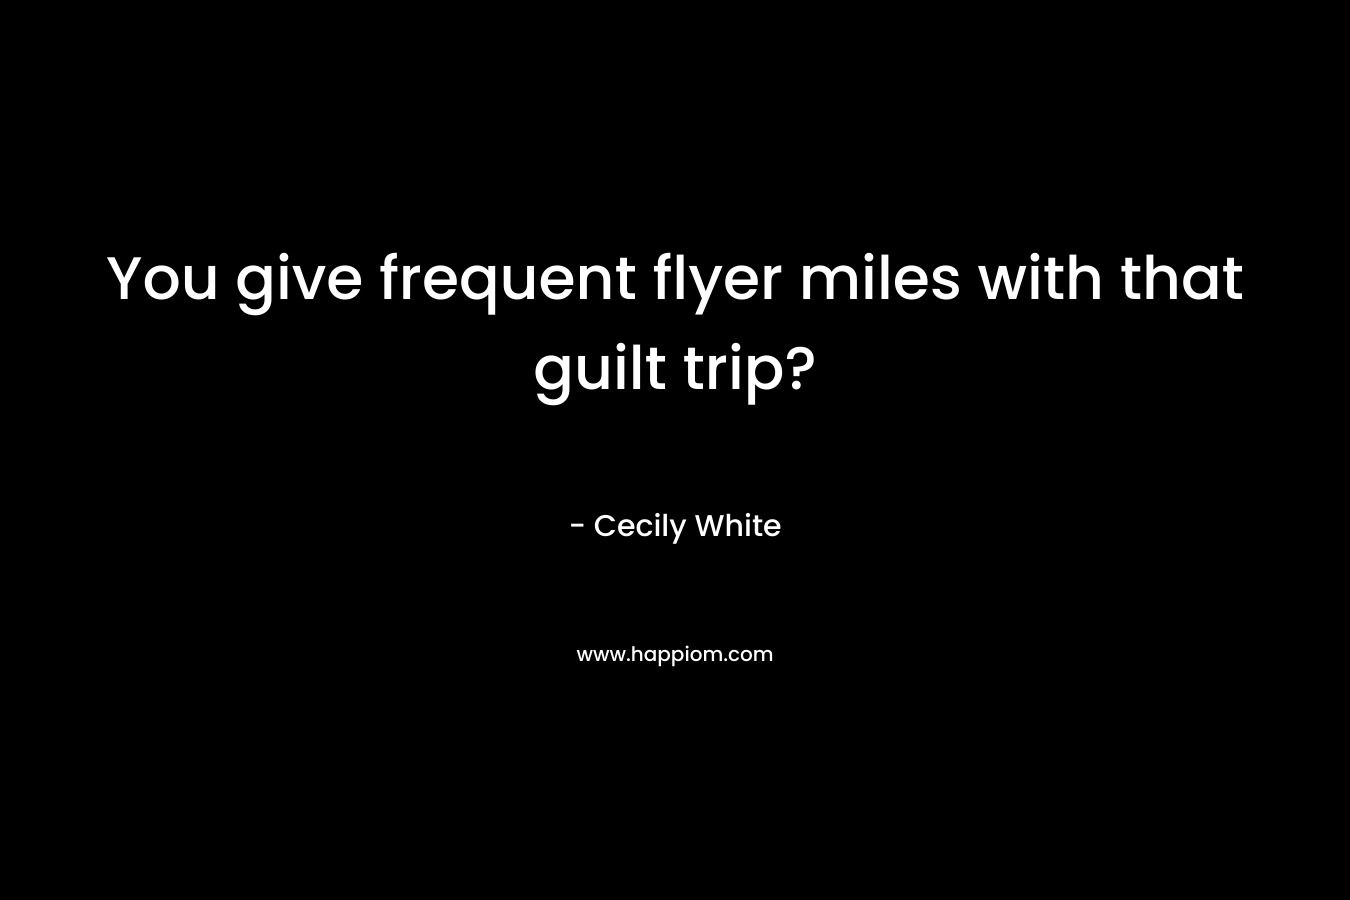 You give frequent flyer miles with that guilt trip? – Cecily White